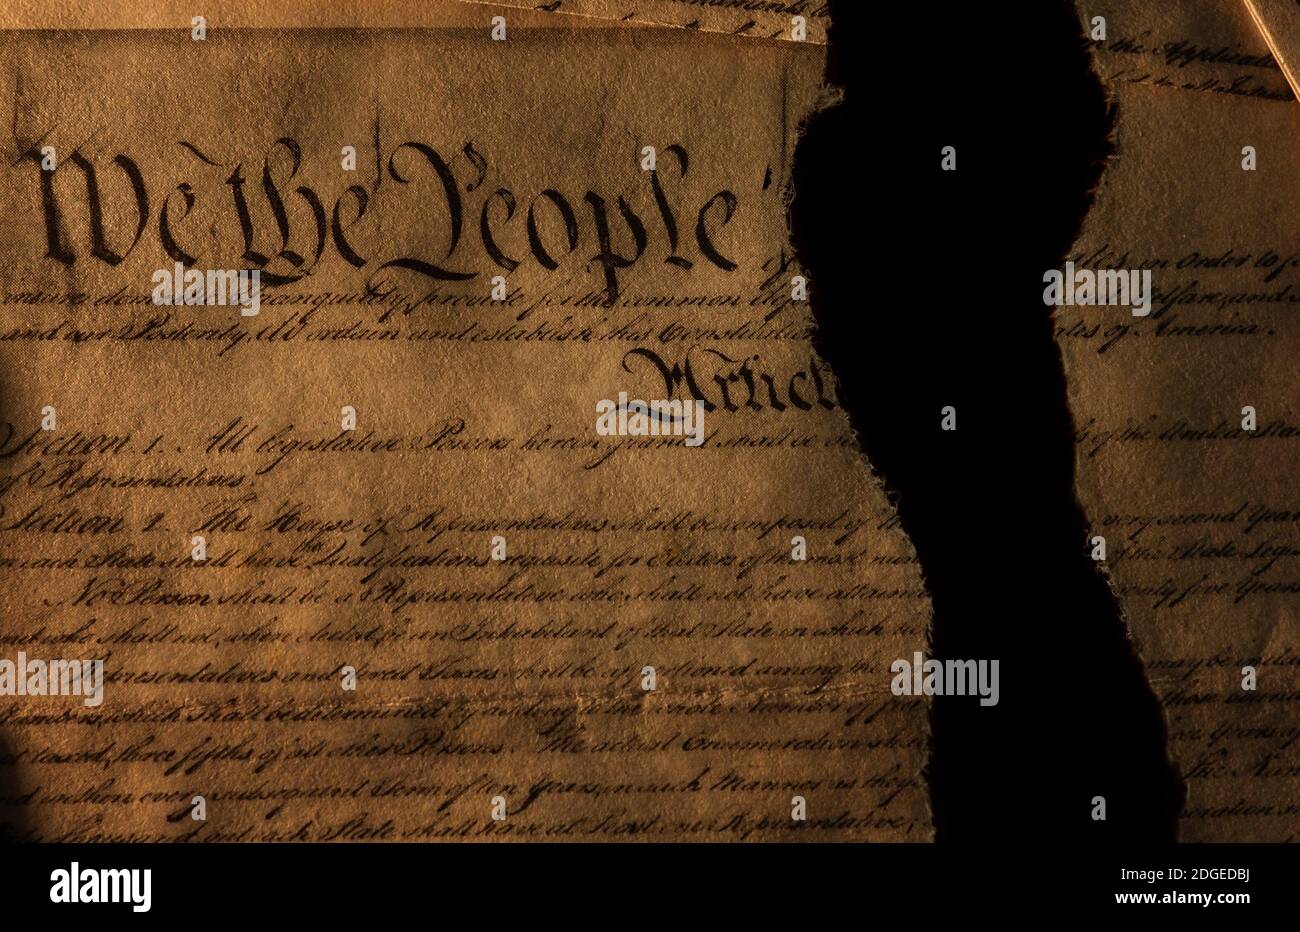 The US Constitution ripped in half Stock Photo